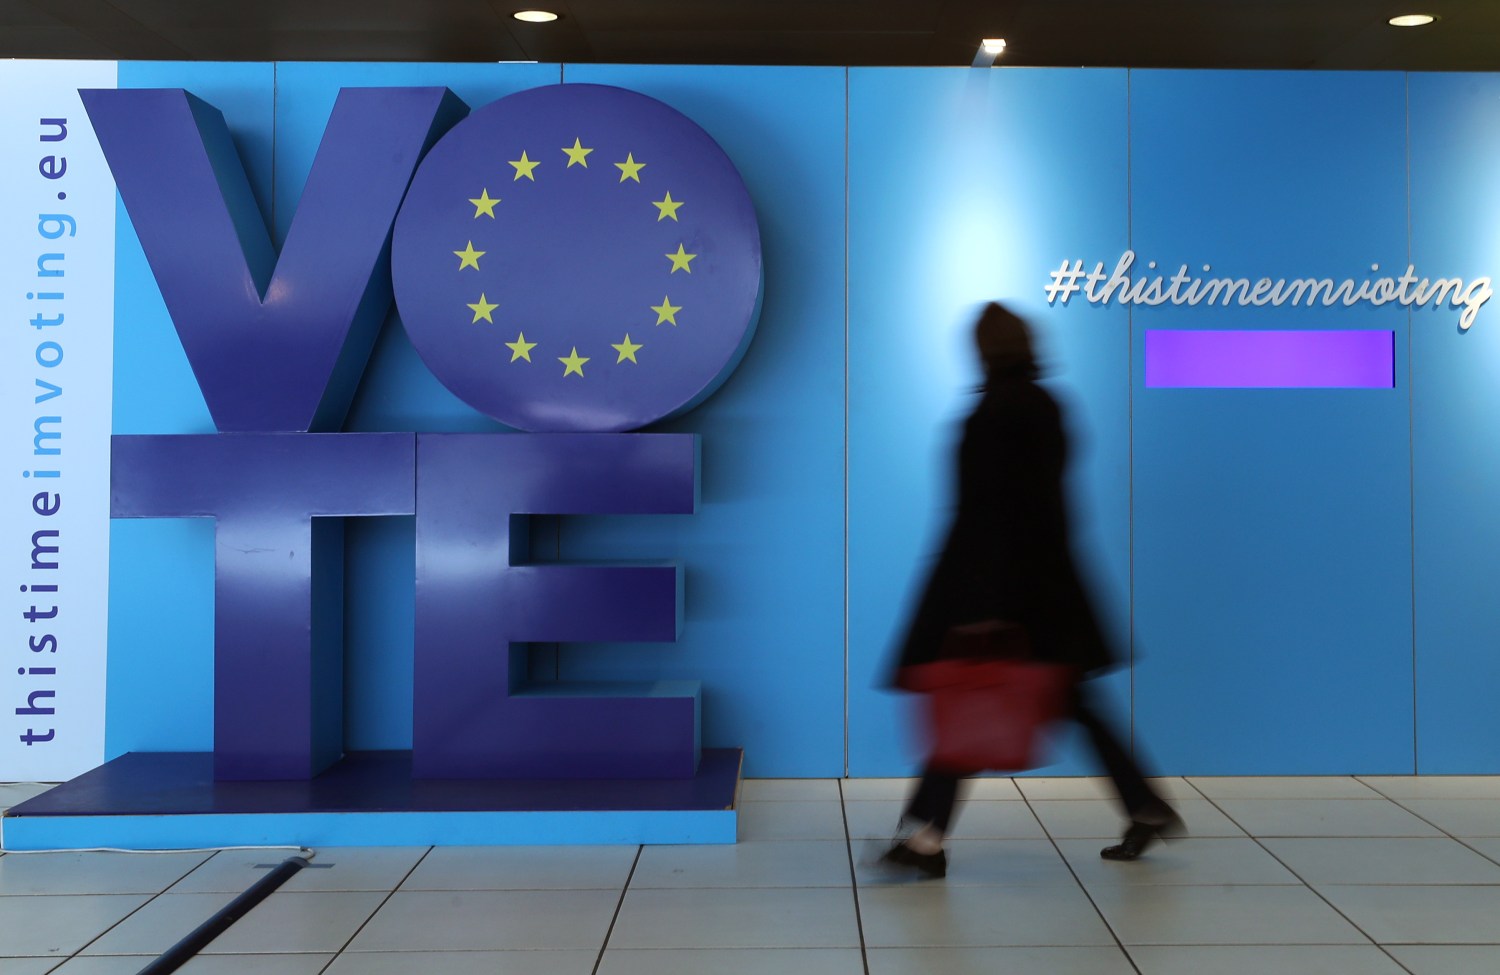 A woman walks past an advertising board for the EU elections at the Schuman railway station near the European Parliament in Brussels, Belgium, May 22, 2019. REUTERS/Yves Herman - RC1471A03120